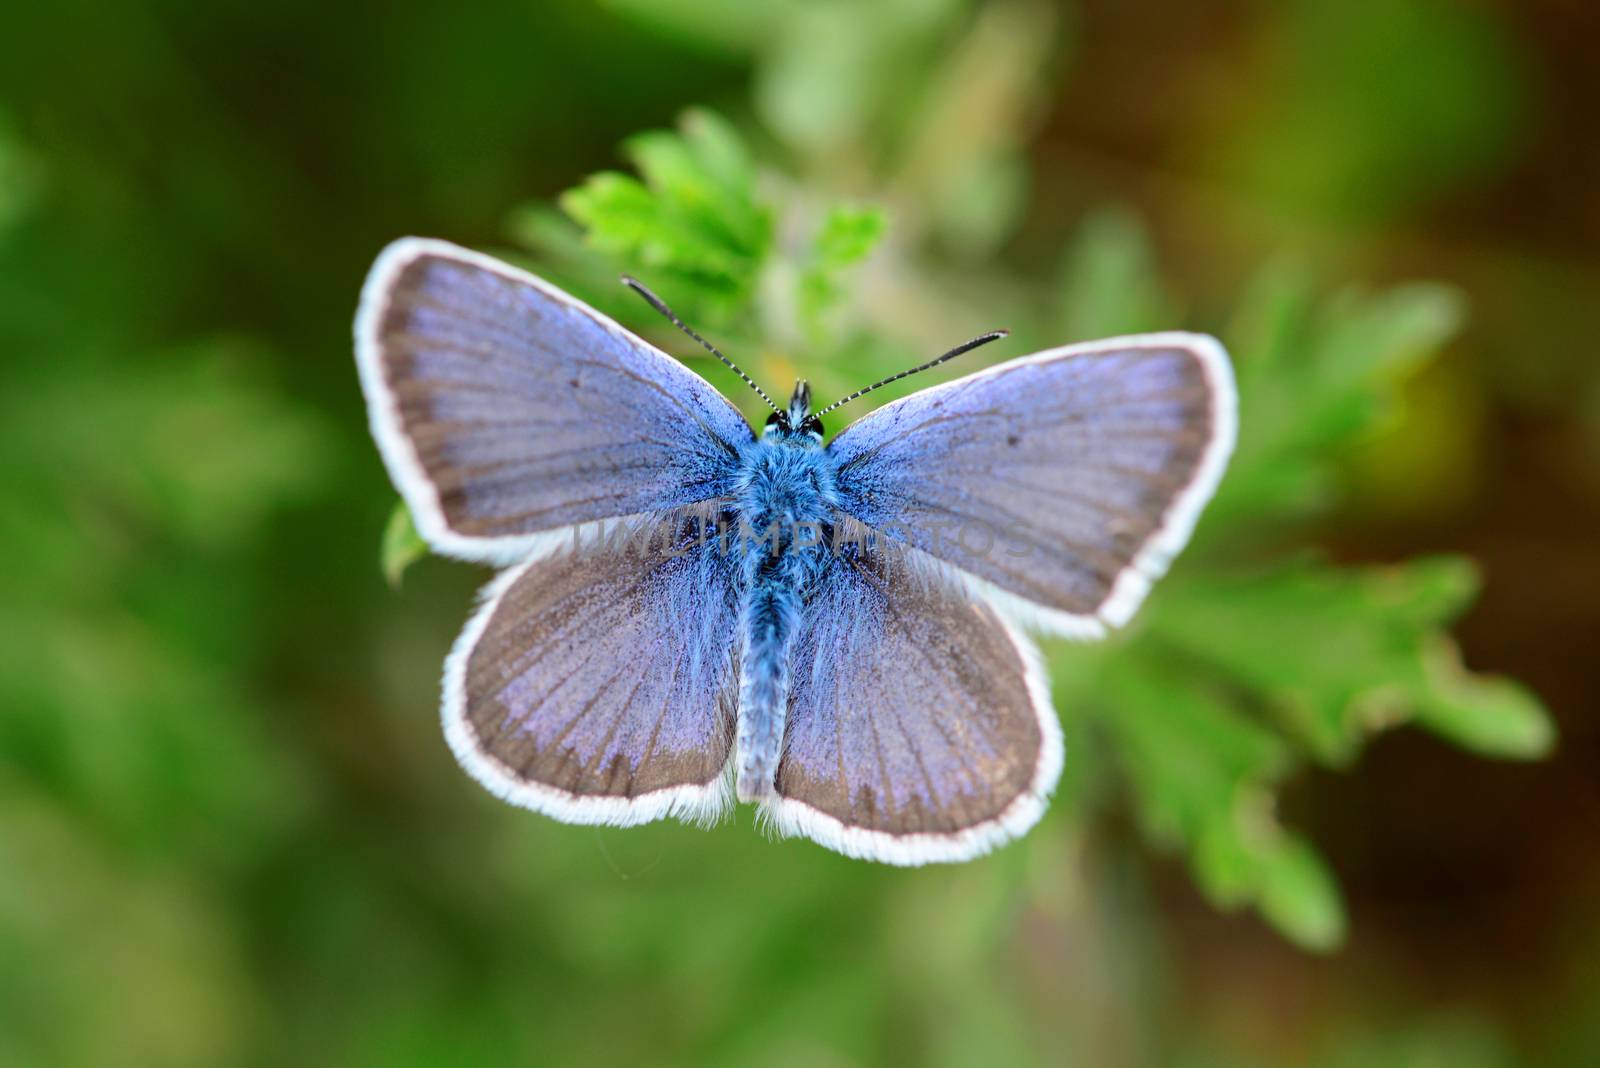 Common blue butterfly close detail over green natural background